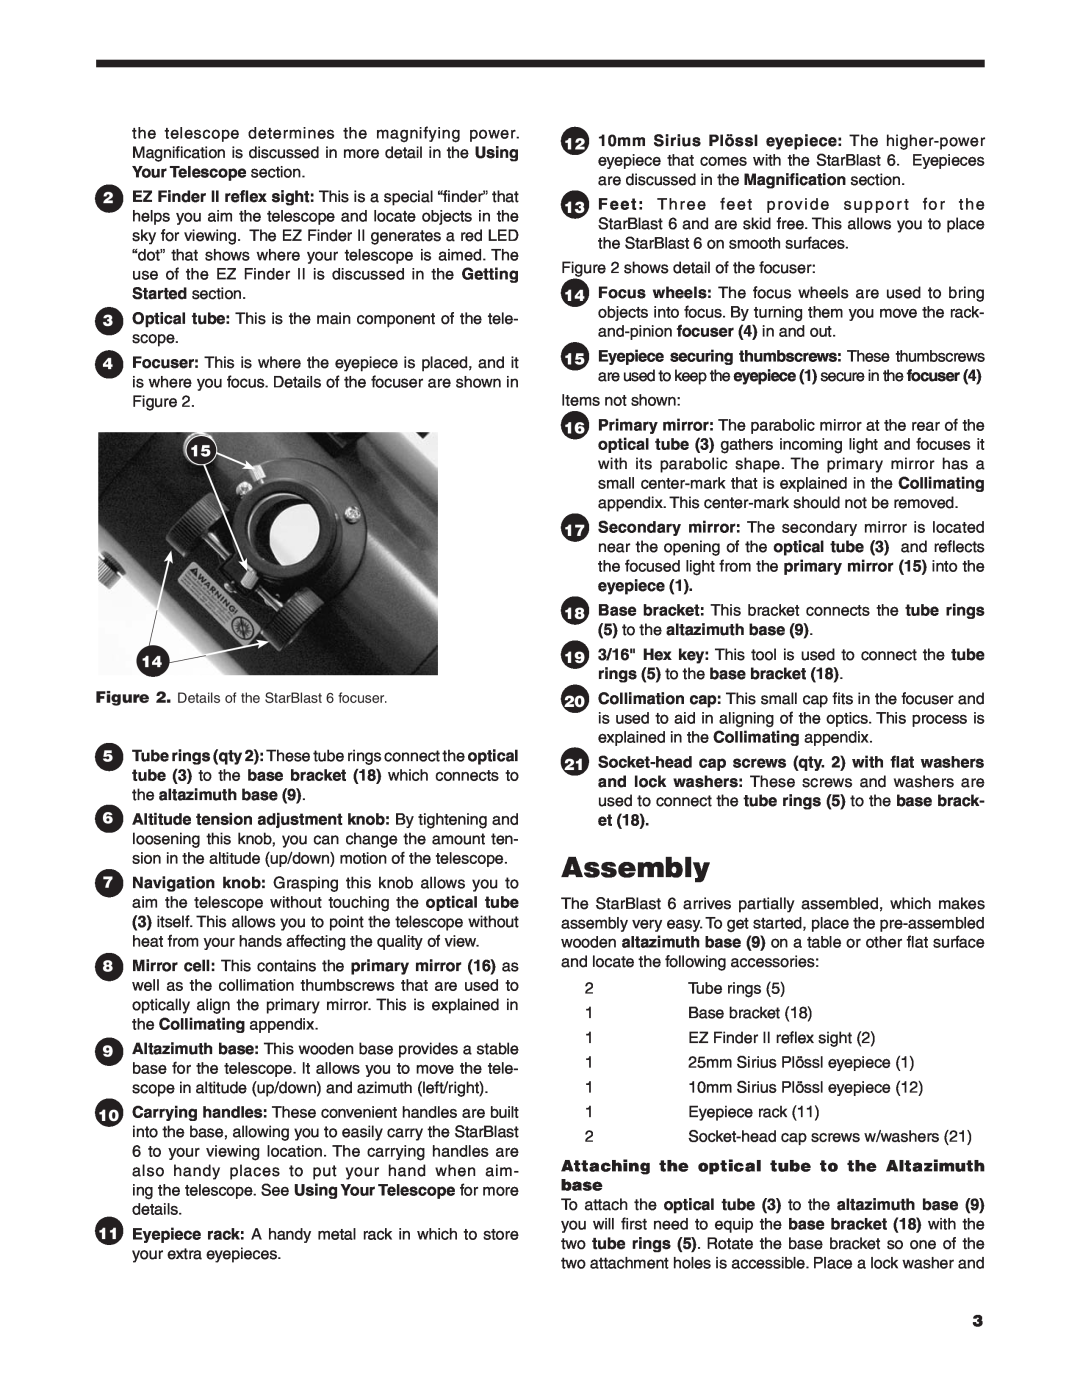 Orion 9964 instruction manual Assembly, to the altazimuth base, Attaching the optical tube to the Altazimuth base 